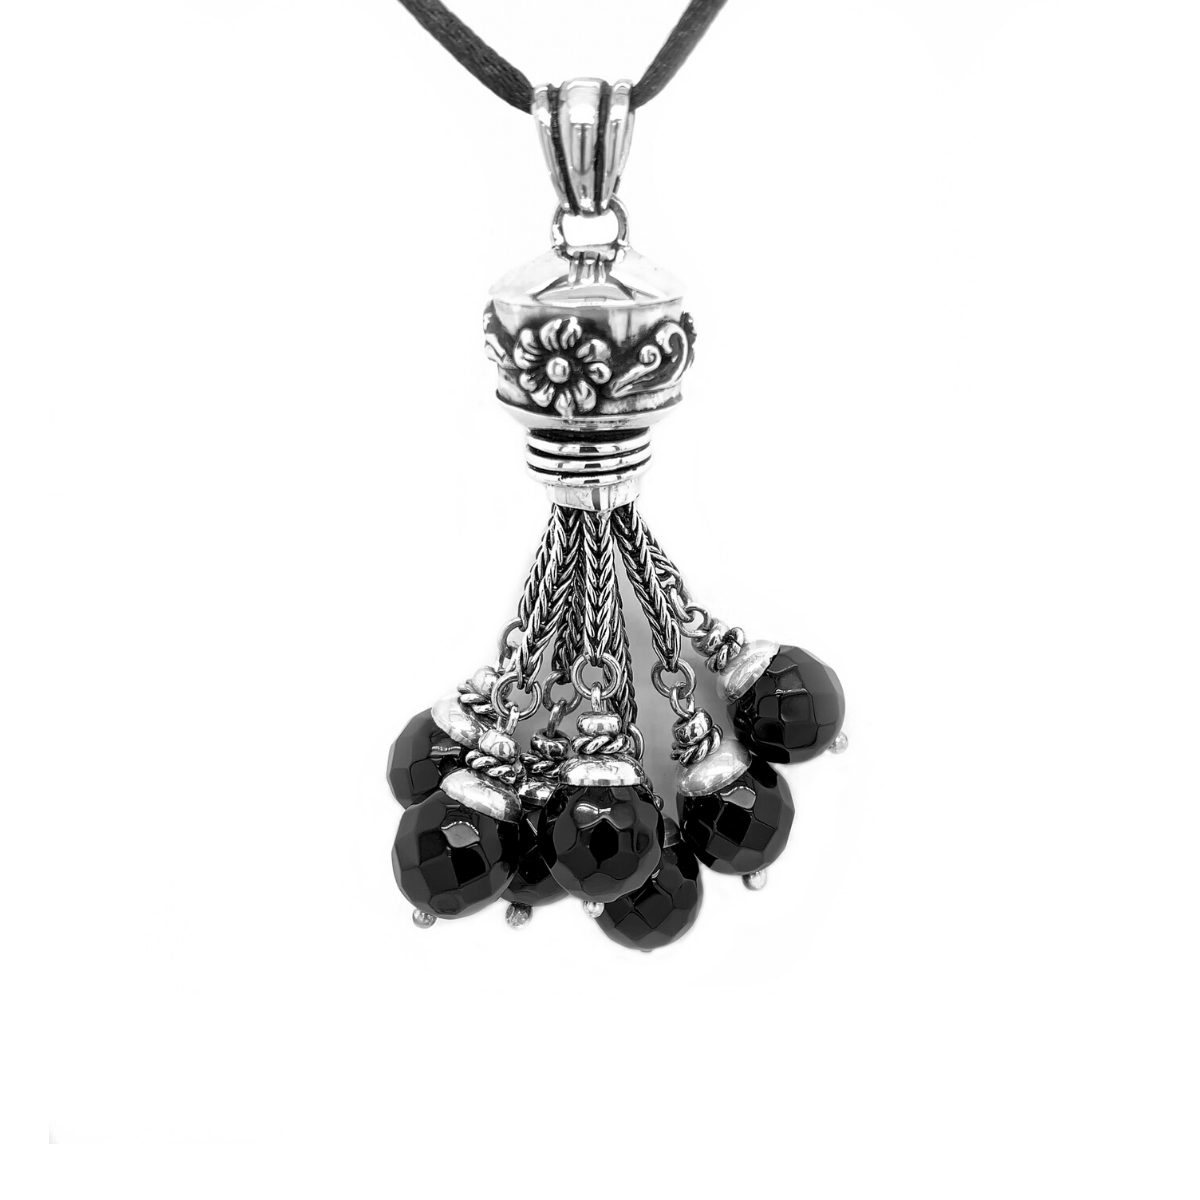 Faceted Black Onyx & Sterling Silver 'Angel Caller' Pendant - Qinti - The Peruvian Shop